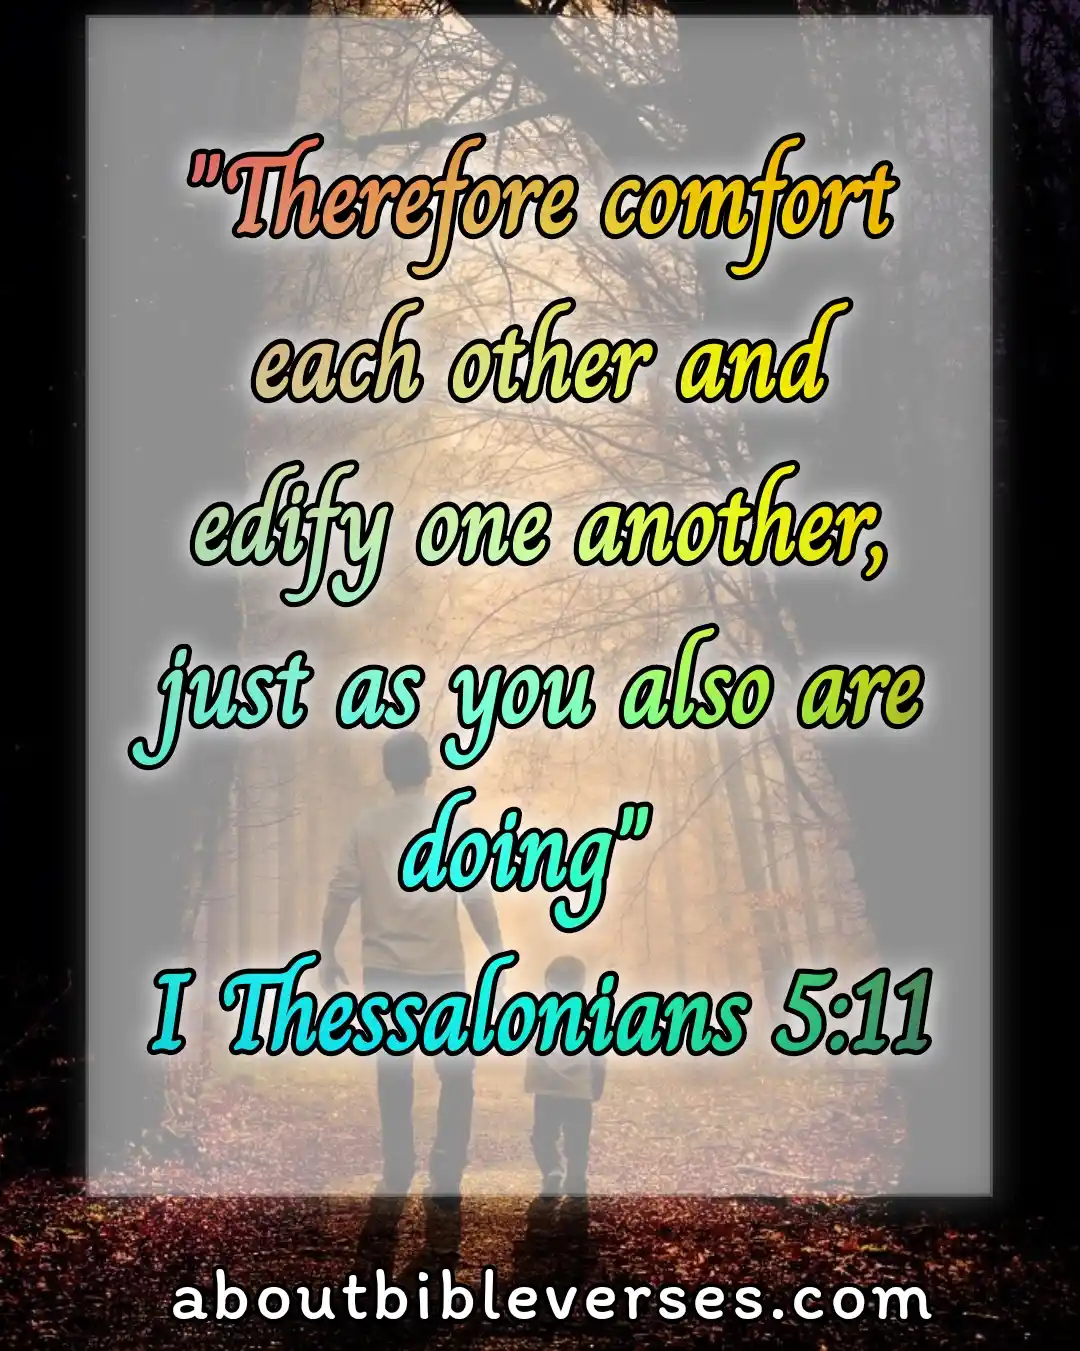 today bible verse (1 Thessalonians 5:11)